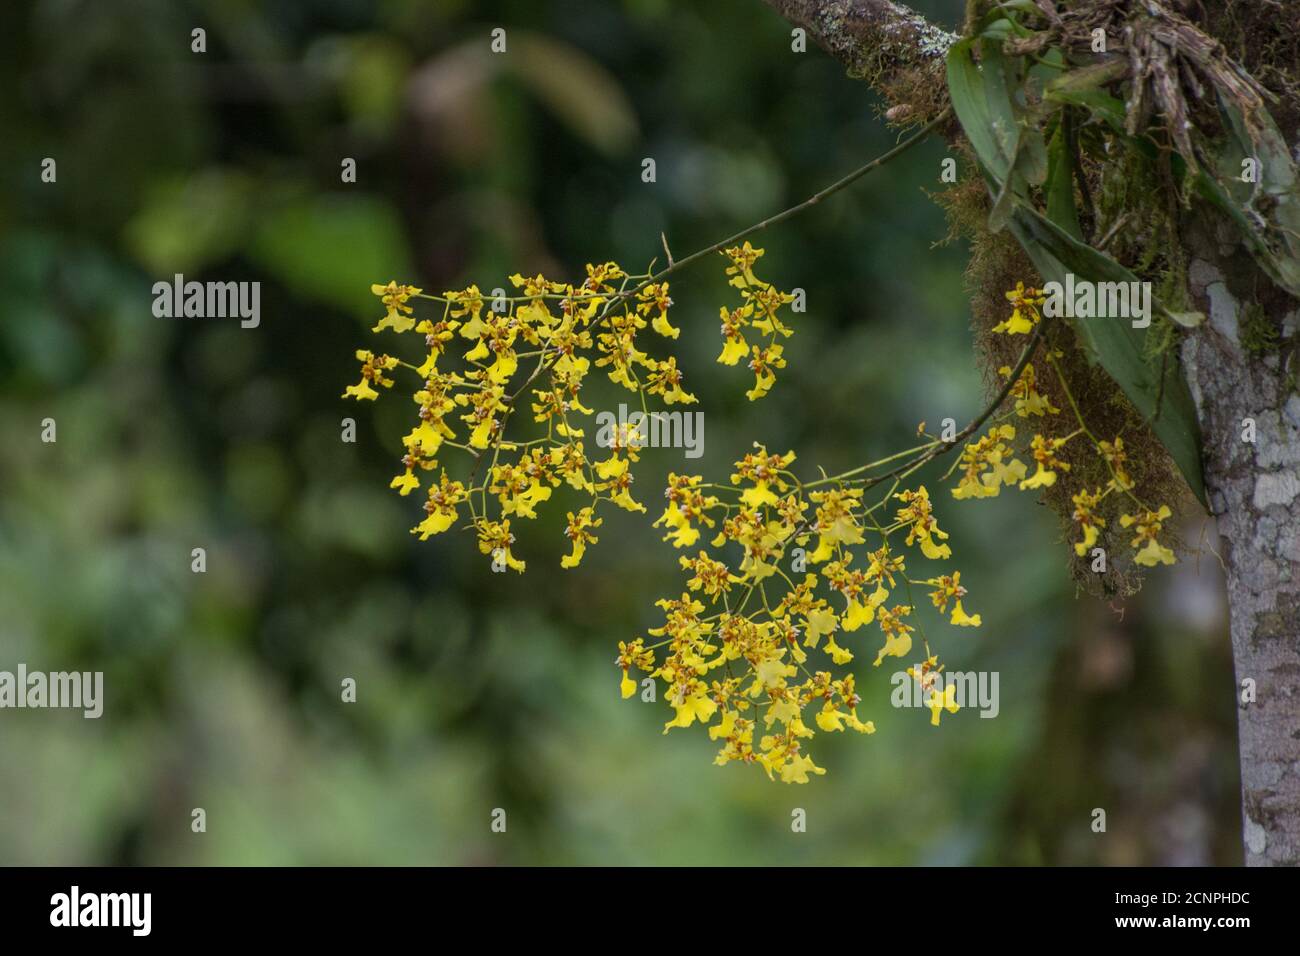 golden shower orchid or dancing lady orchid (Oncidium sp) from the Andean cloud forest of Ecuador. Stock Photo